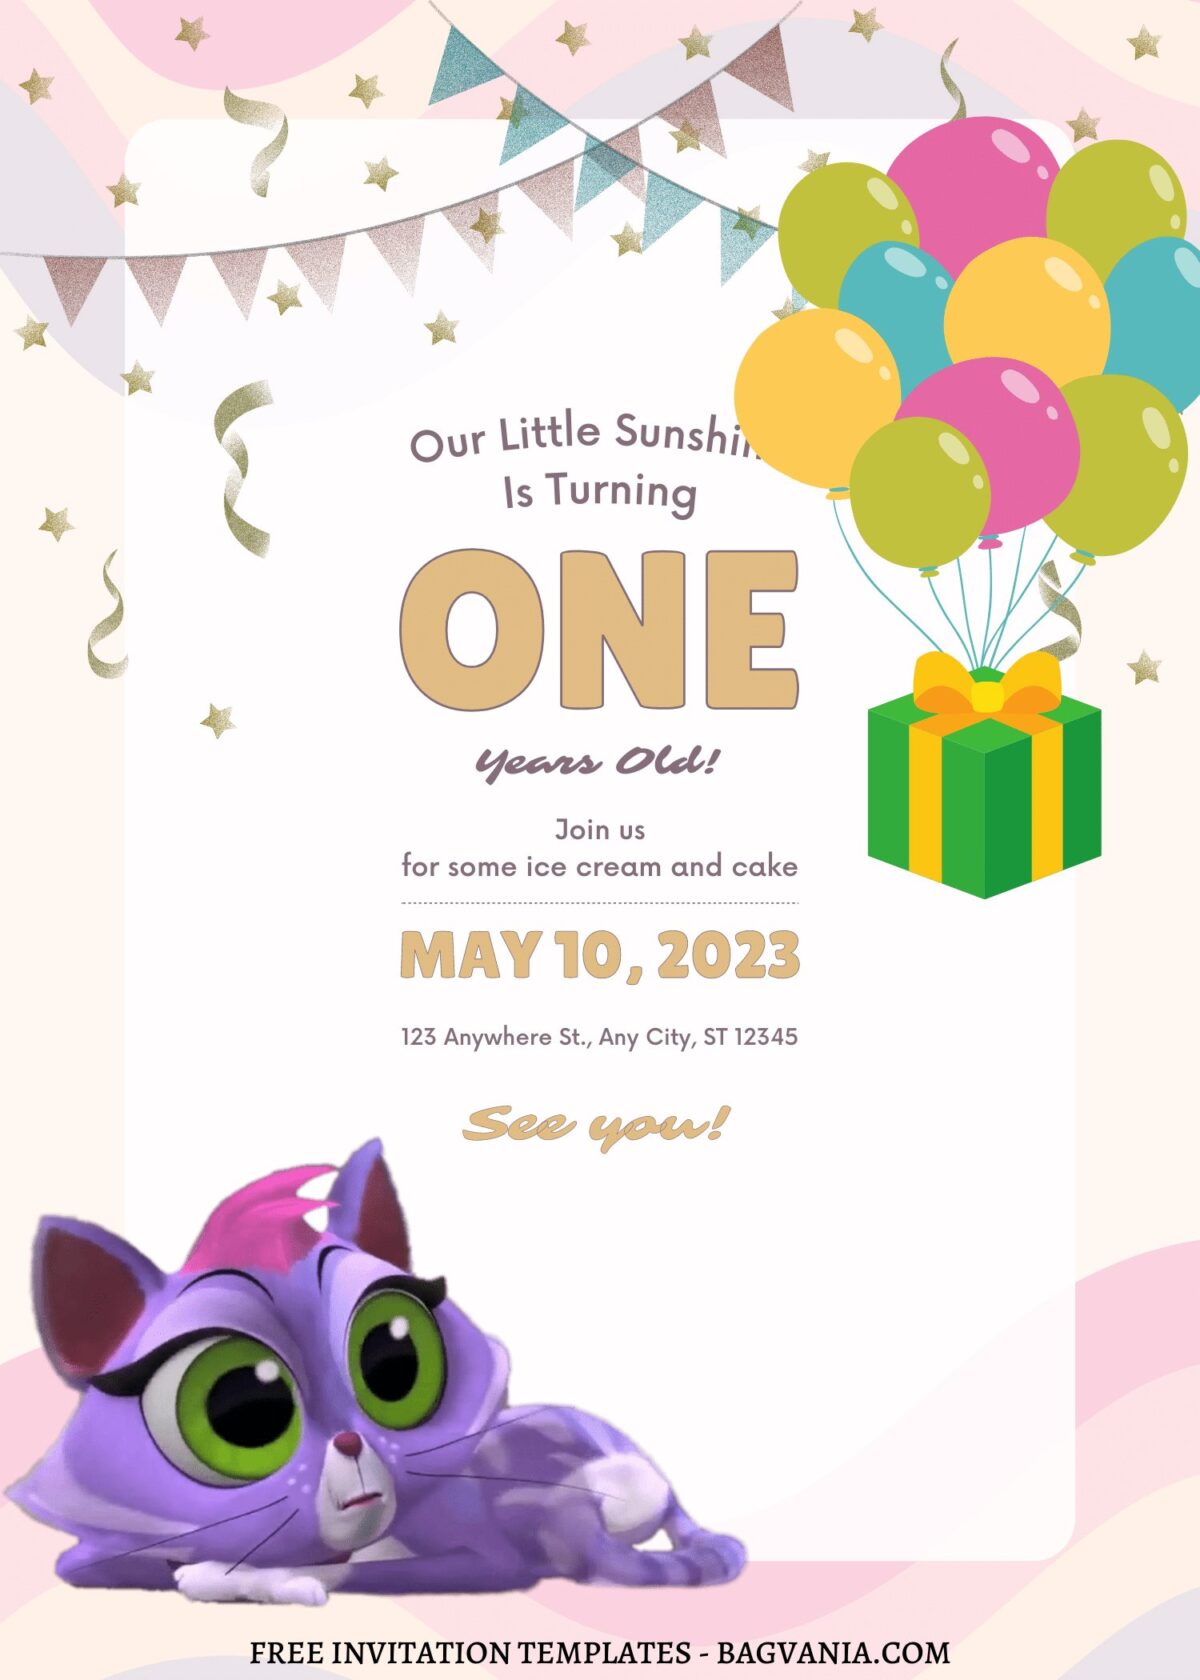 10+ Cute Little Puppy Sunshine Canva Birthday Invitation Templates with colorful balloons